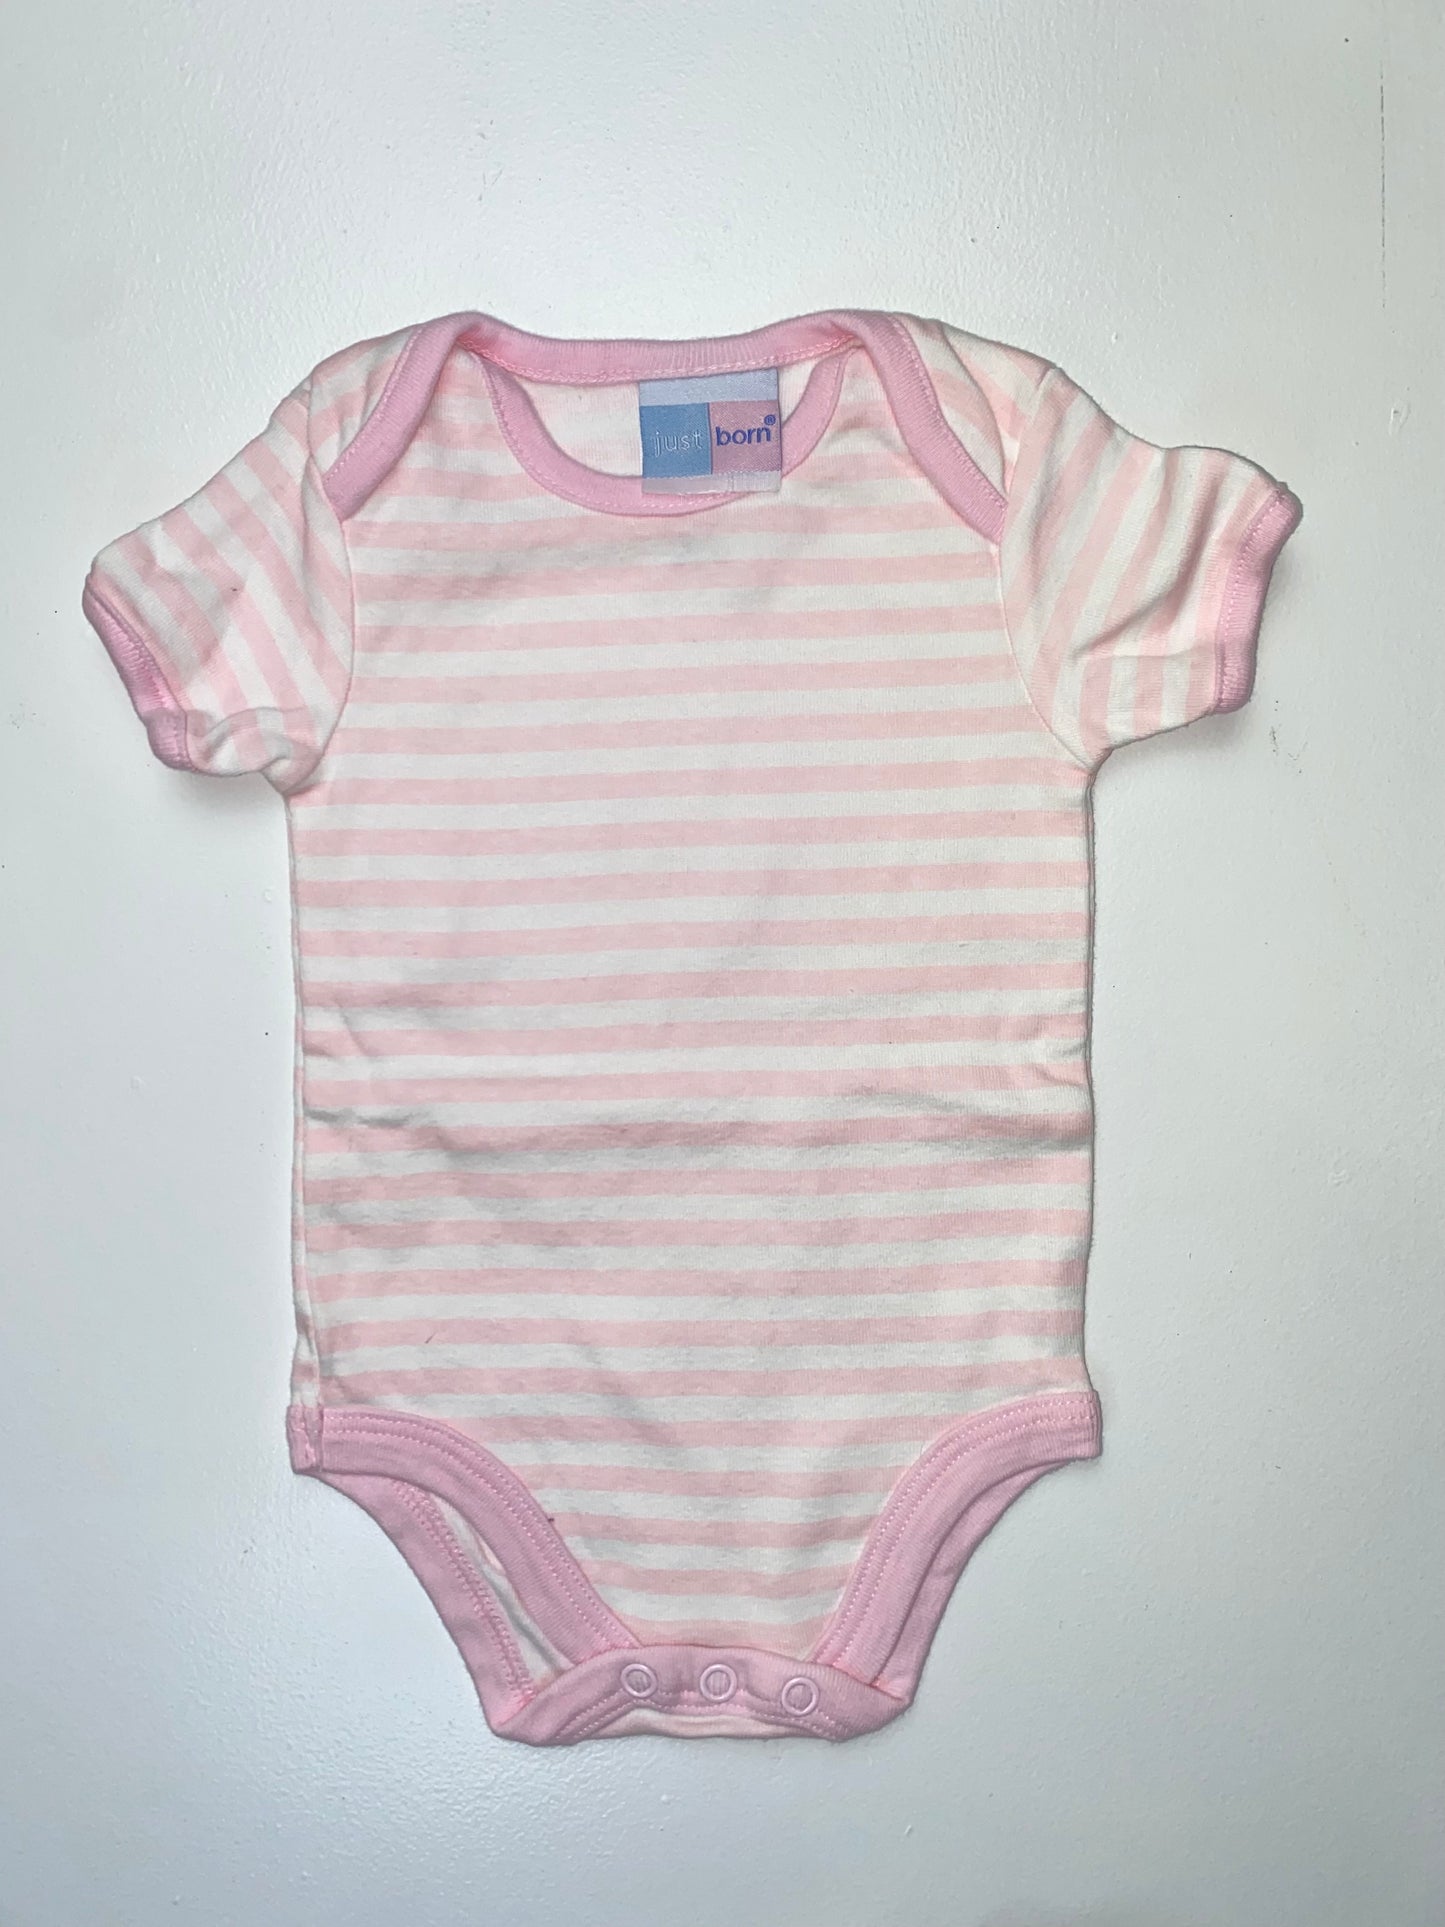 Just Born Pink and White Striped Onesie 0-3M